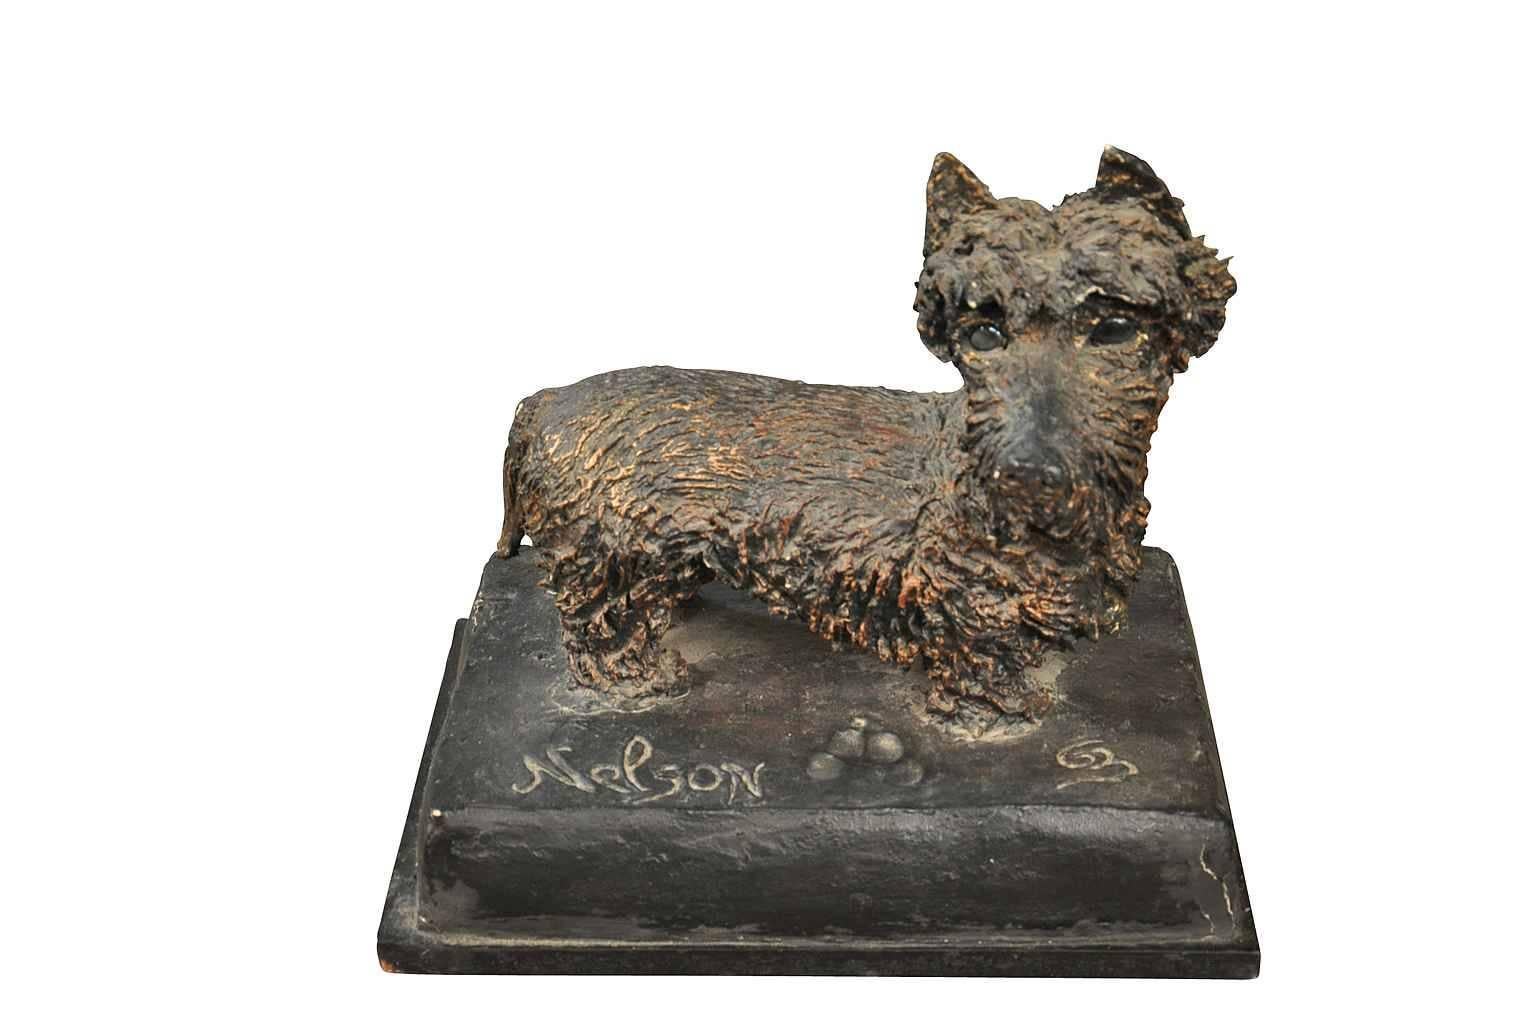 A delightful mid-20th century papier mâché statue of a Scottish Terrier named Nelson.